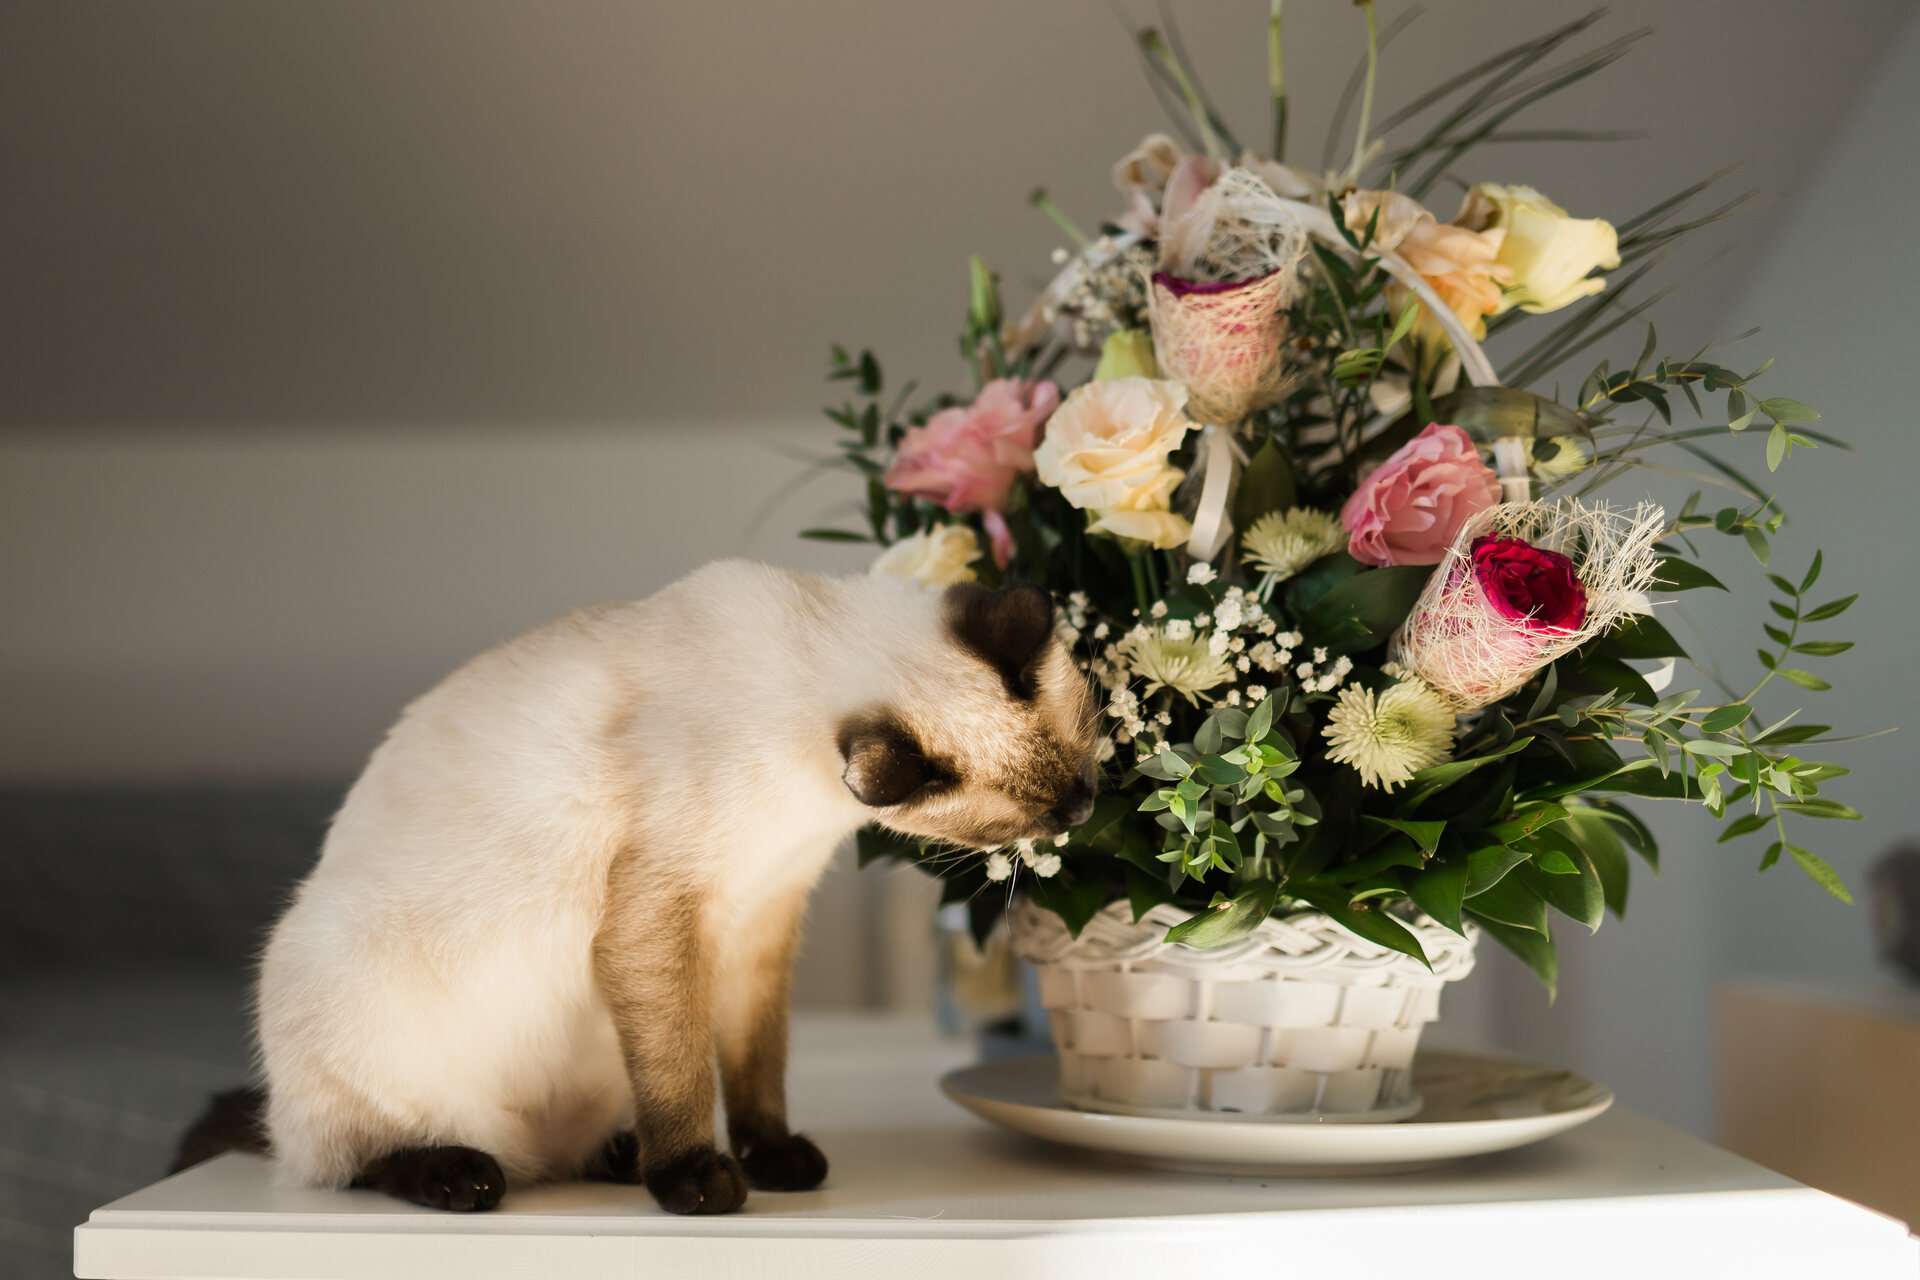 A cat sniffing at a bouquet of flowers in a vase